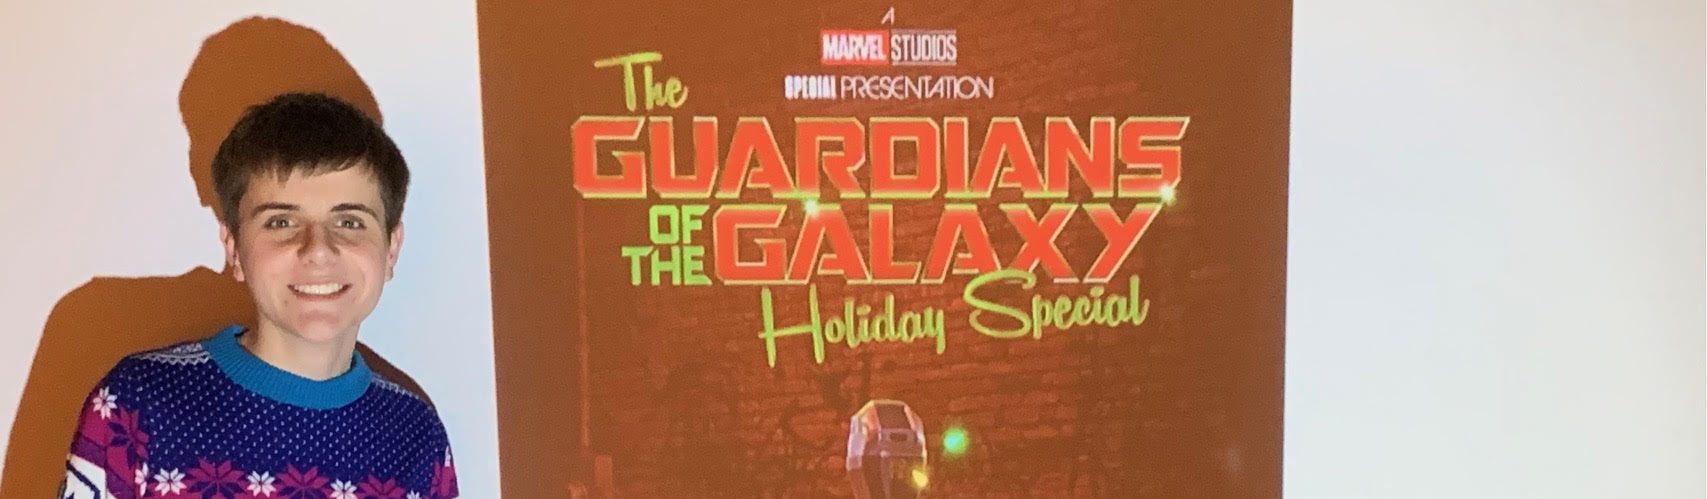 Disney + Marvel The Guardians of the Galaxy Holiday Special